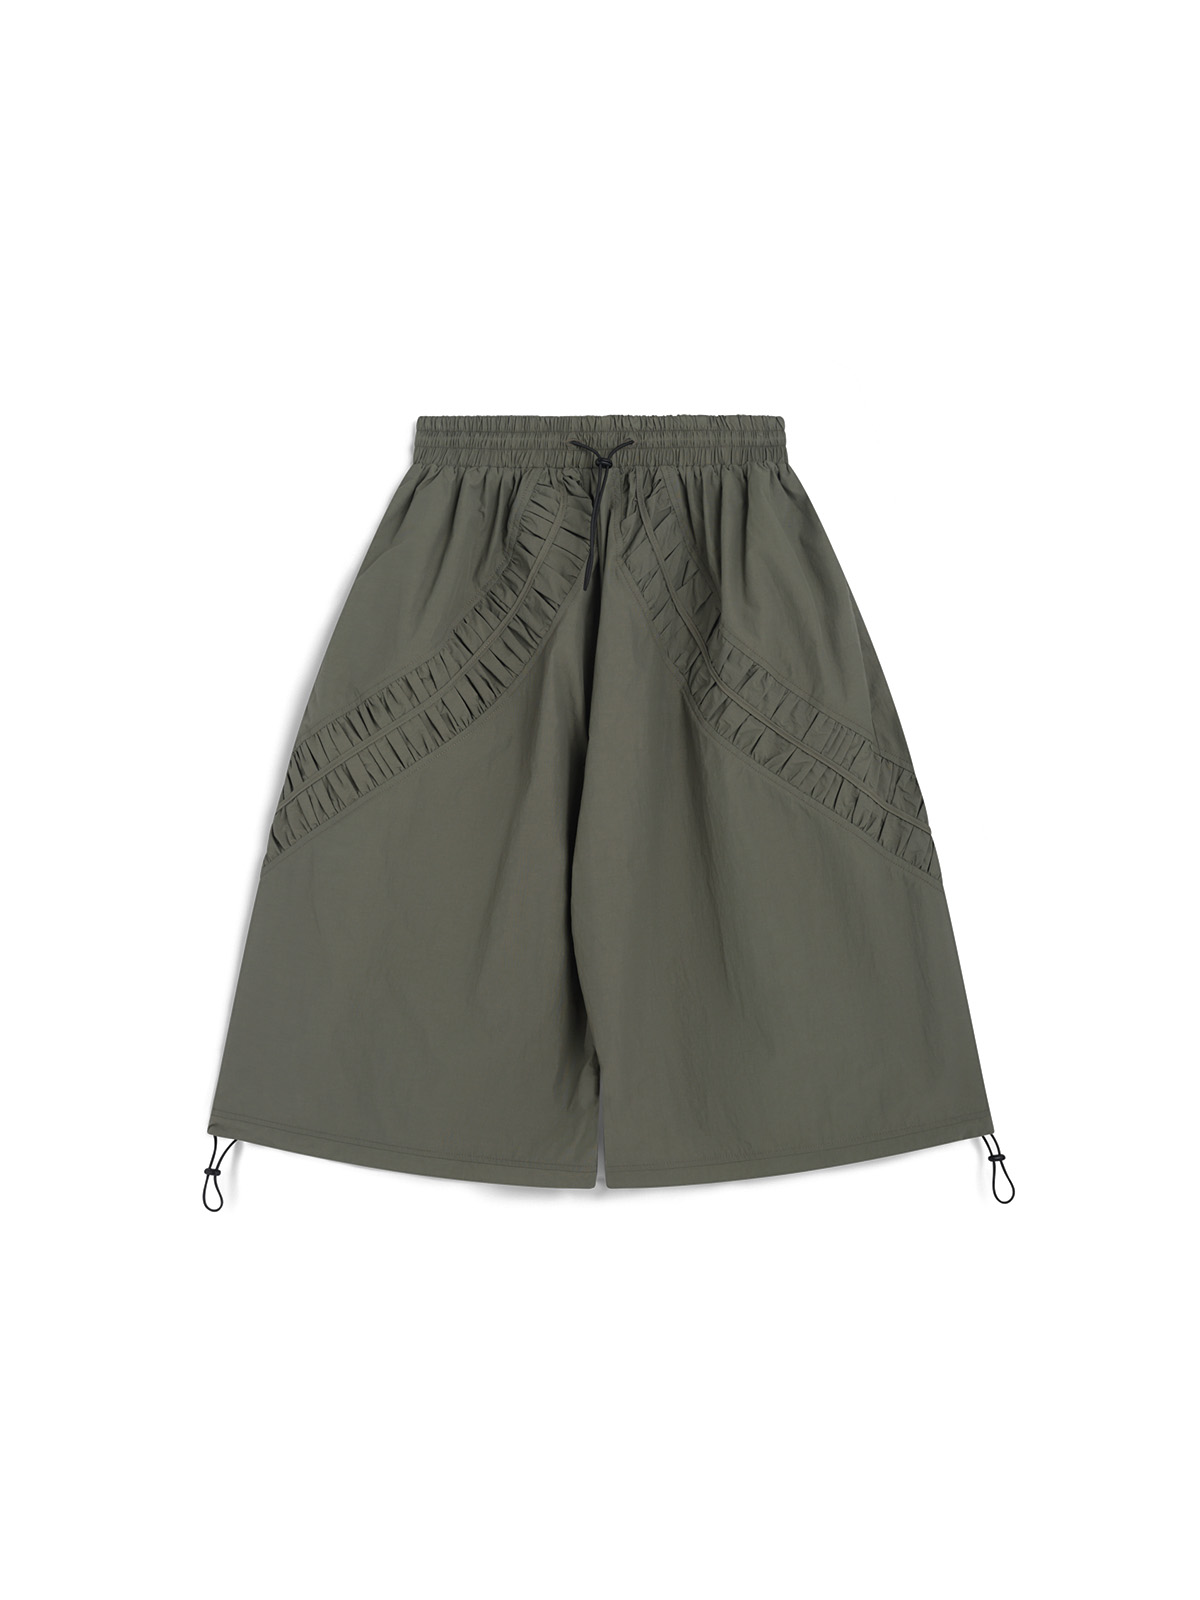 FOSSIL SHORTS (SAGE)